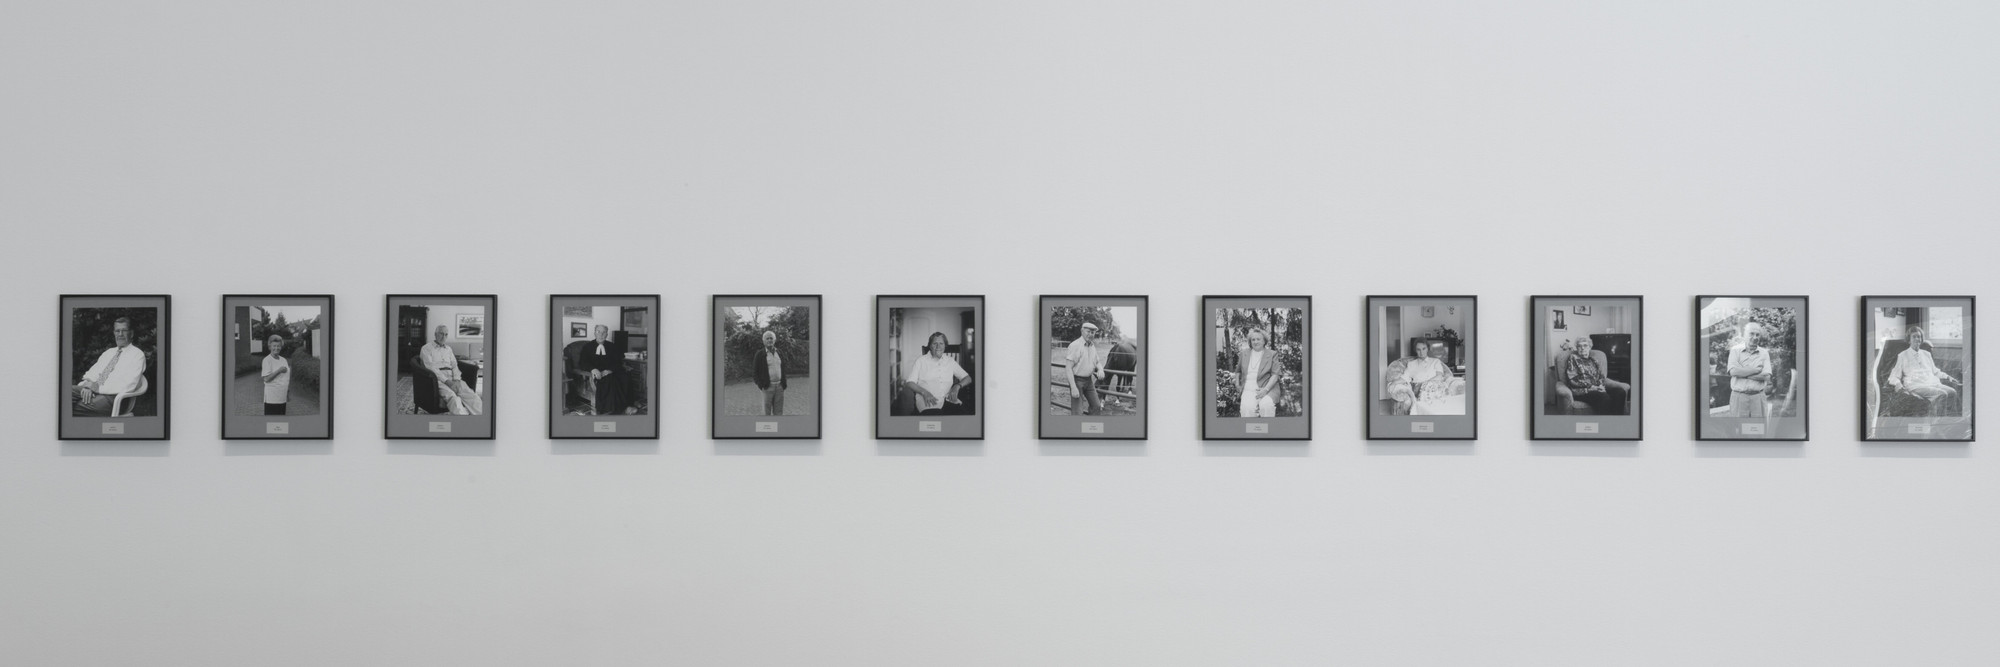 Installation view, of Inbox: Hans-Peter Feldmann’s 100 Years, The Museum of Modern Art, New York, February 11–March 12, 2017. Shown: Hans-Peter Feldmann. 100 Years. 2001. 101 gelatin silver prints, each 12 × 9 1/2″ (30.5 × 24.1 cm). The Photography Council Fund, and Vital Projects Fund, Robert B. Menschel, 2016. © 2017 Hans-Peter Feldmann/Artists Rights Society (ARS), New York/VG Bild-Kunst, Germany